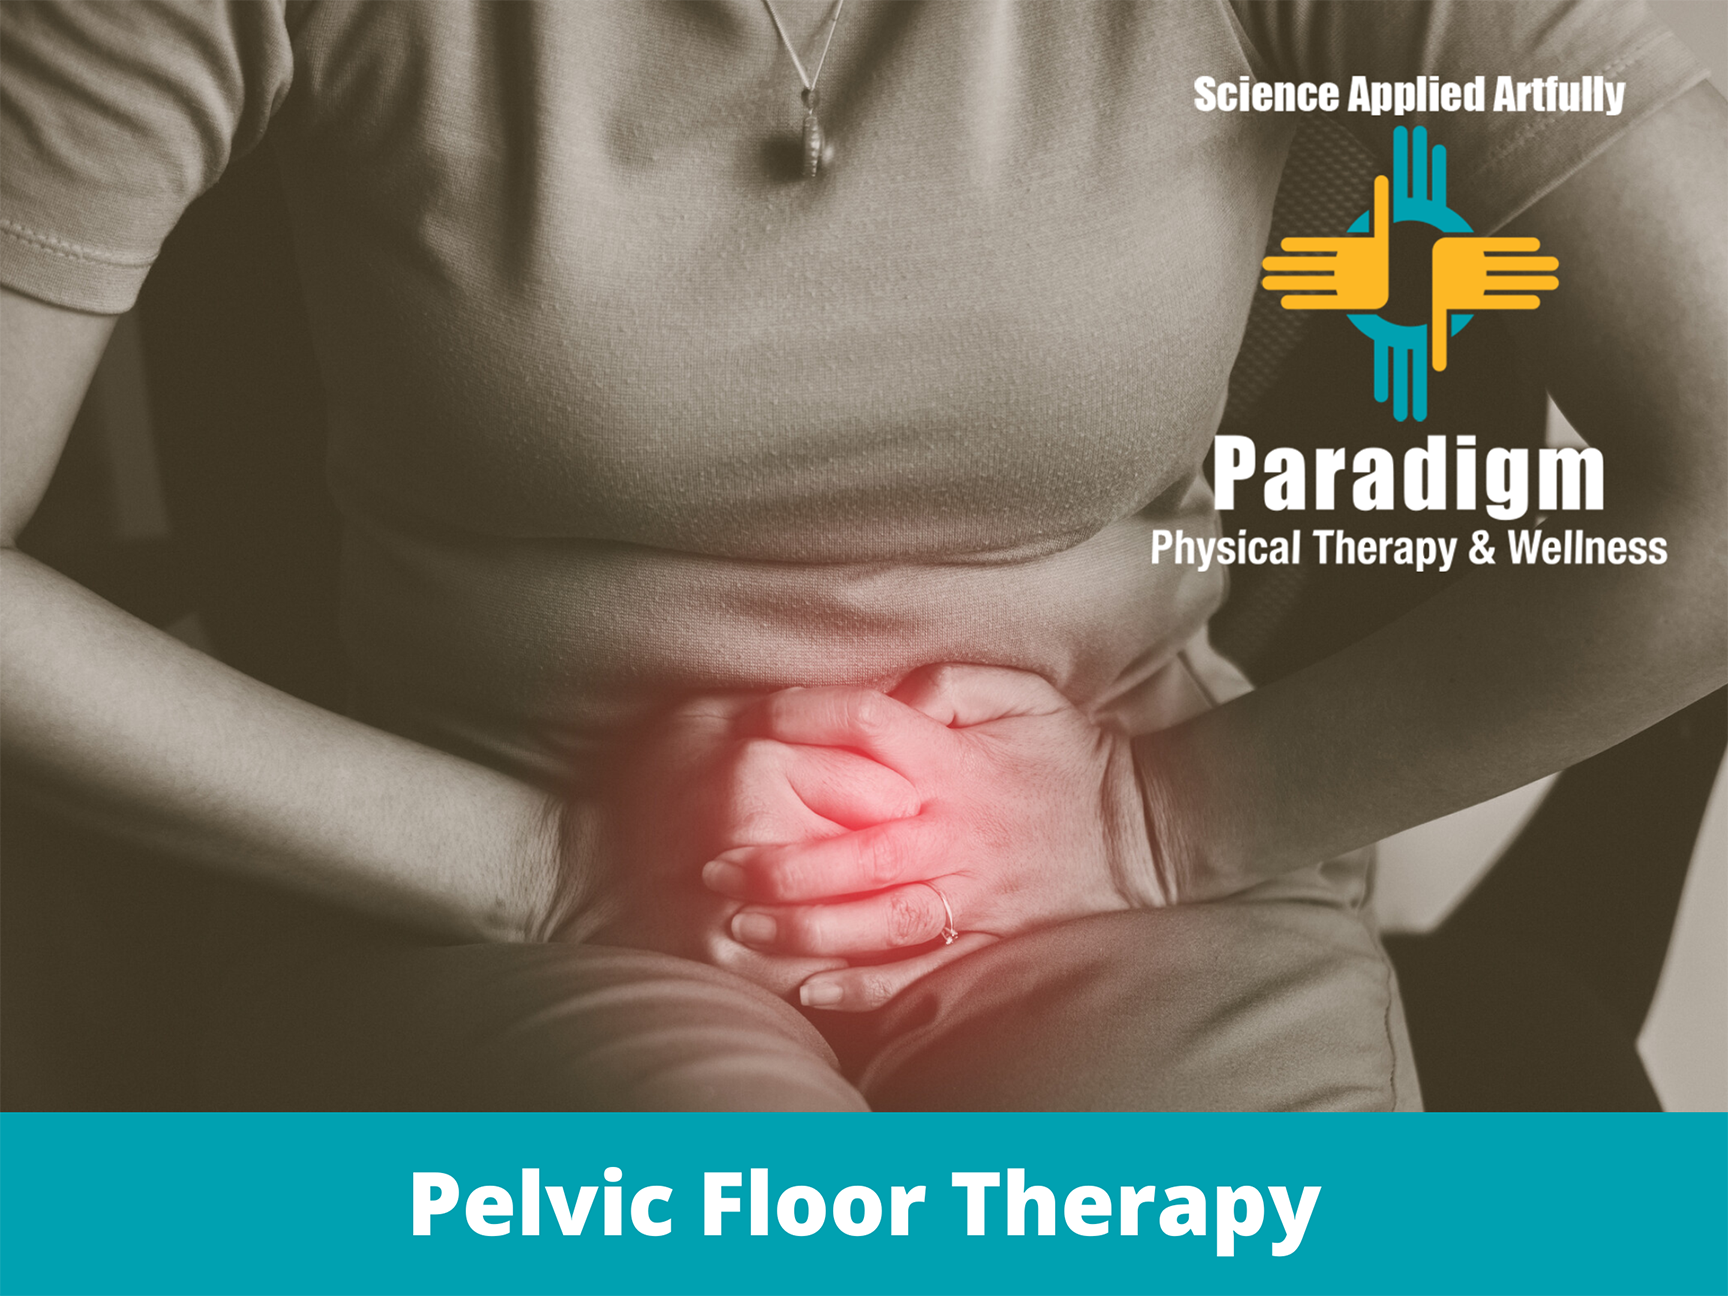 Women’s Health and Pelvic Floor Therapy